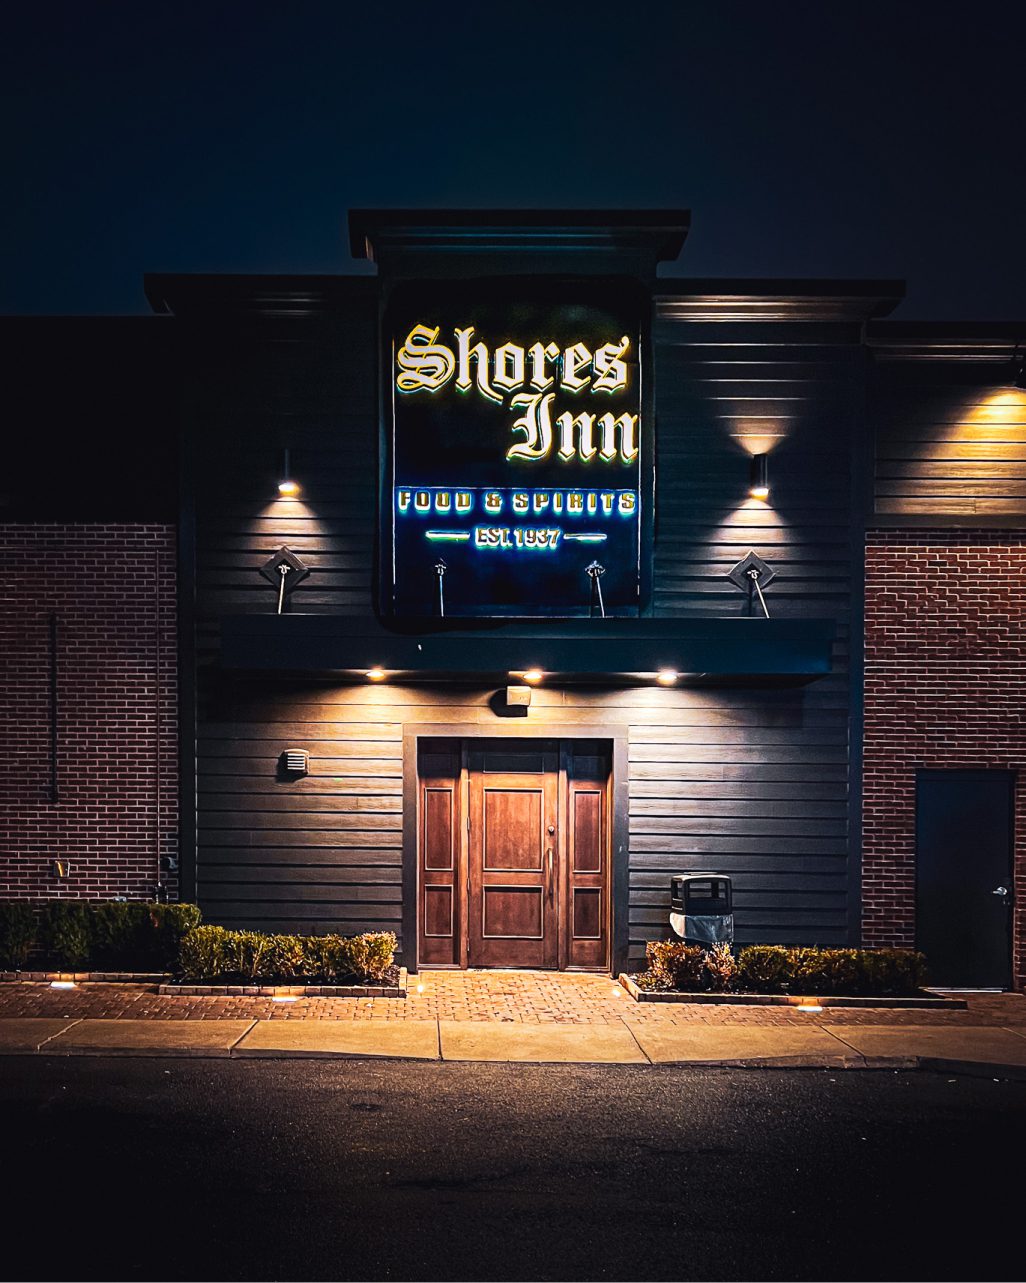 Entrance and signage of Shores Inn in Michigan.